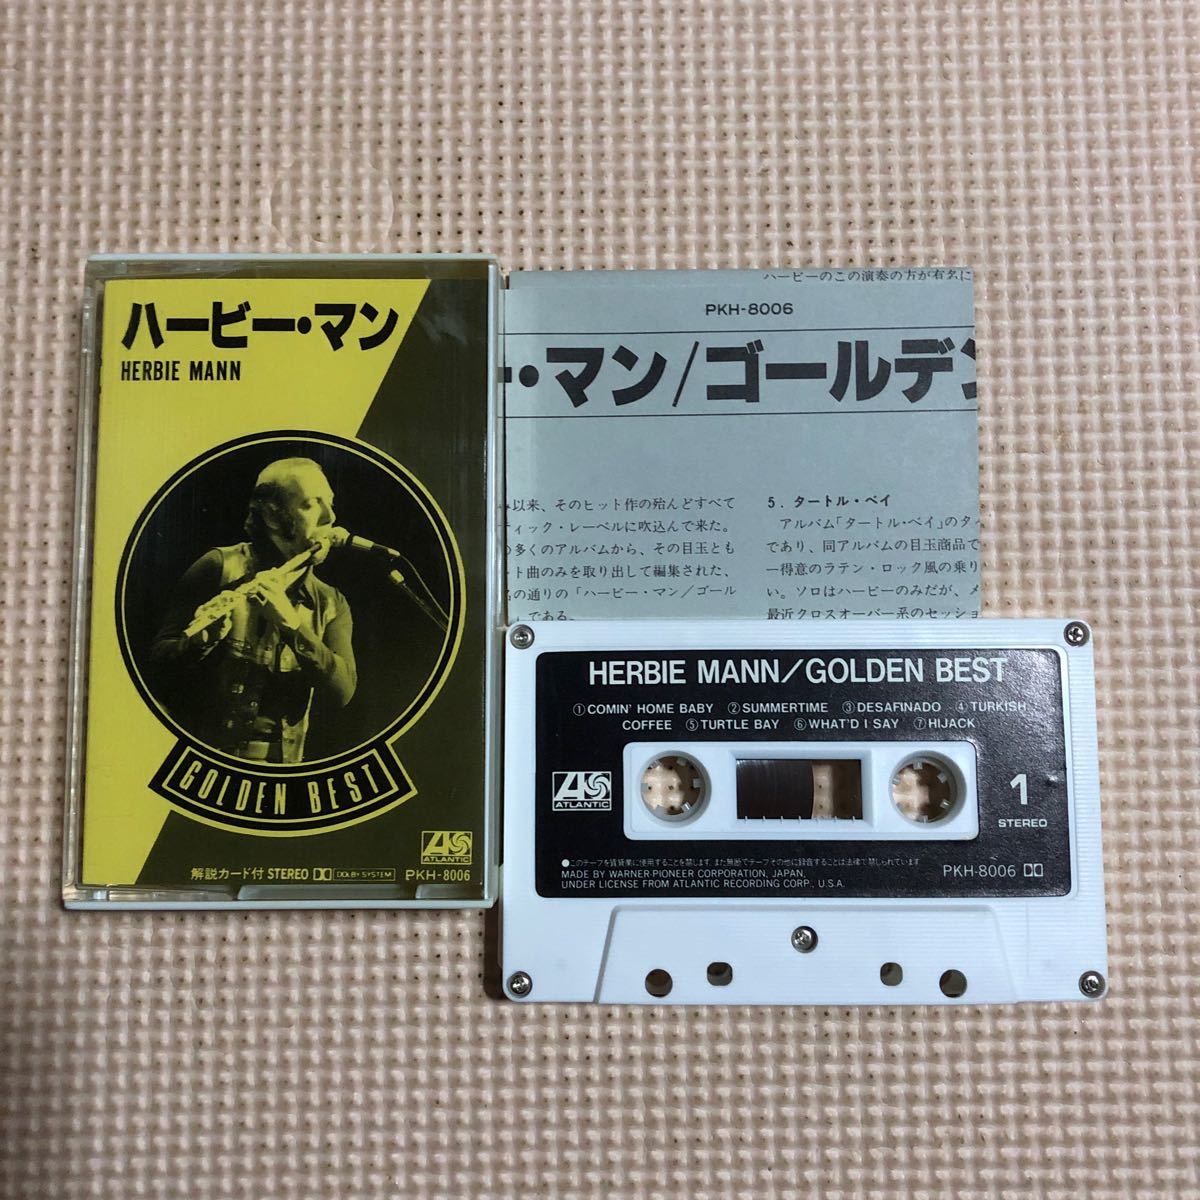  is - Be * man Golden * the best domestic record cassette tape ###